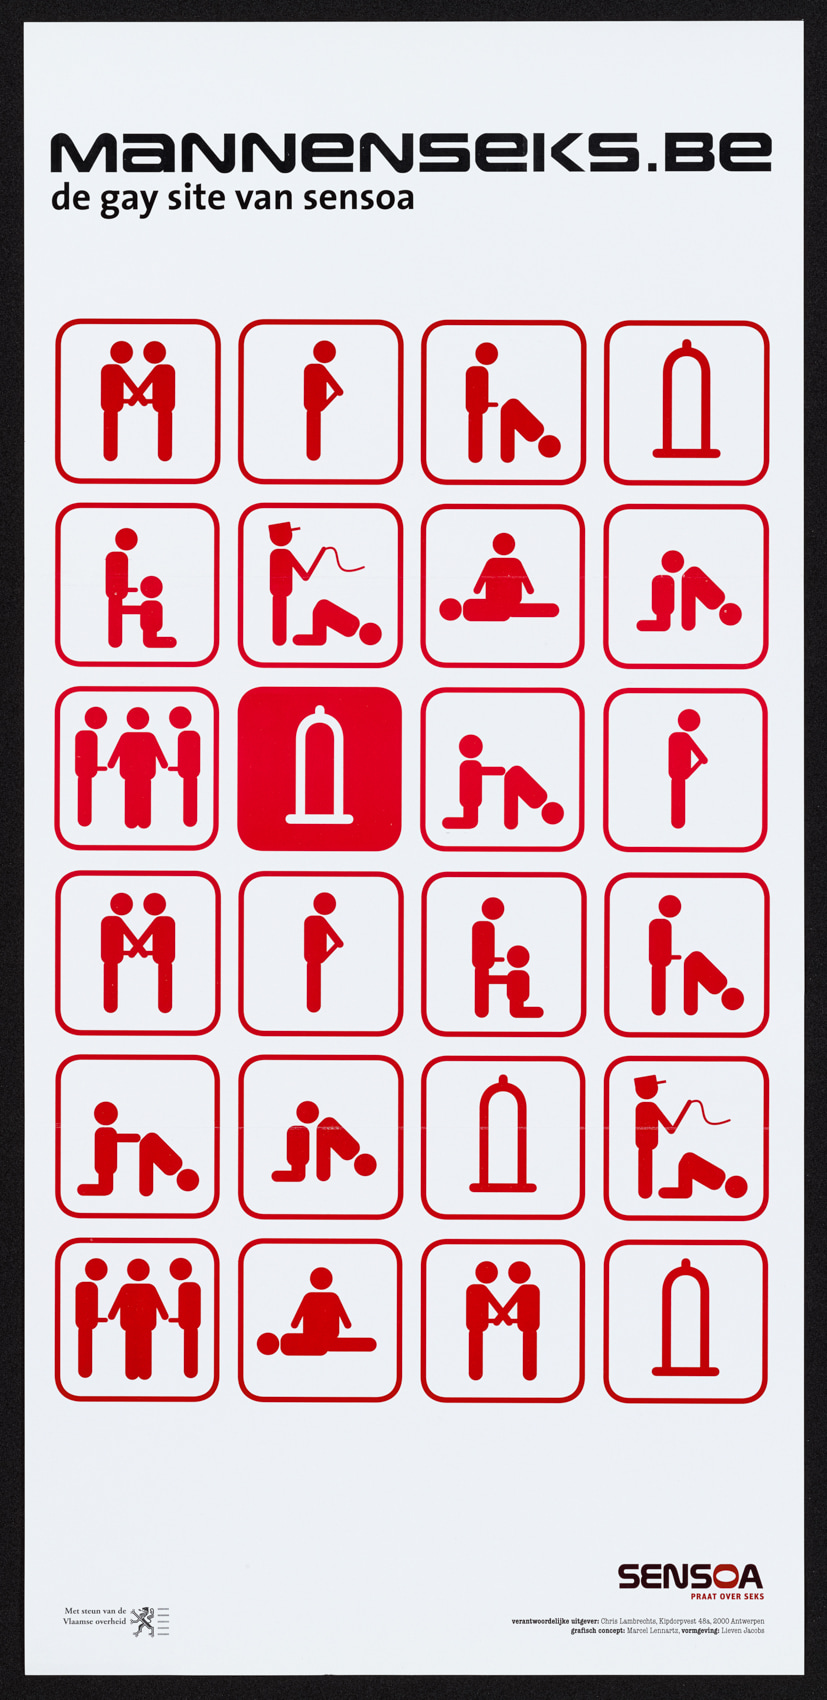 A number of panels featuring various sex acts, drawn like old washroom signs with drawings of condoms sprinkled throughout.